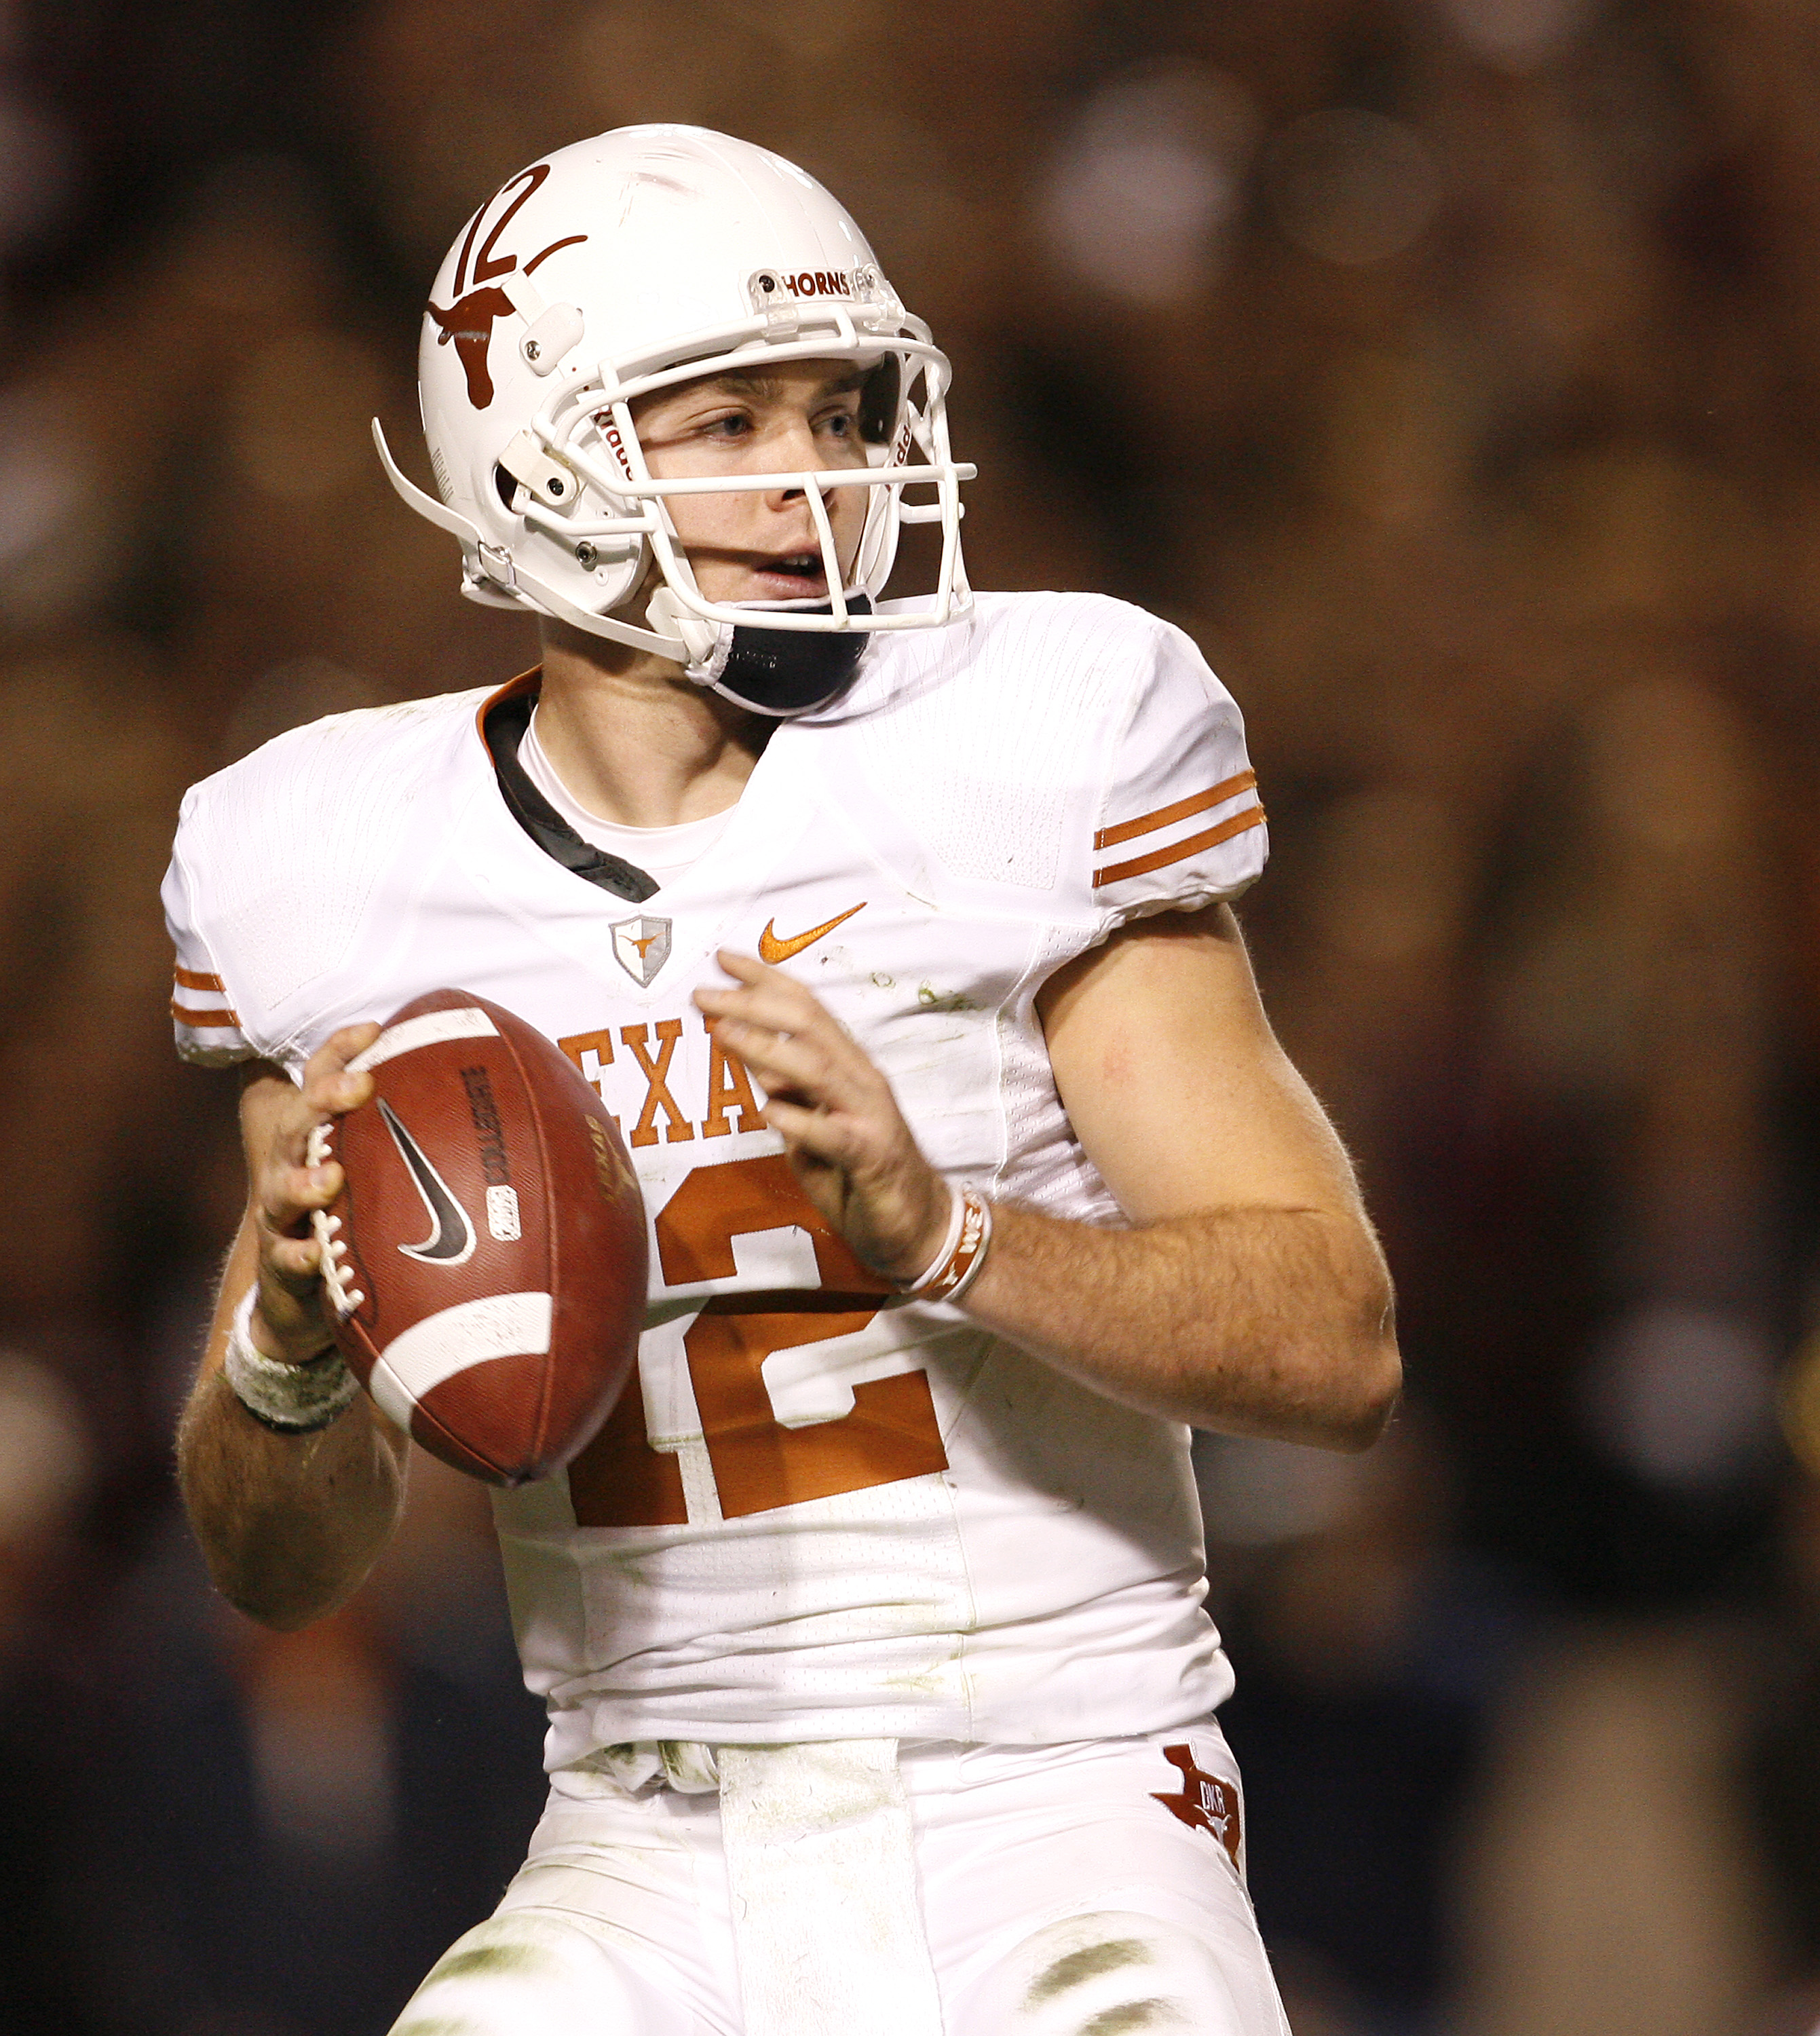 COLLEGE STATION, TX - NOVEMBER 26: Quarterback Colt McCoy #12 of the Texas Longhorns looks to pass the ball downfield against the Texas A&M Aggies in the second half at Kyle Field on November 26, 2009 in College Station, Texas. The Longhorns defeated the